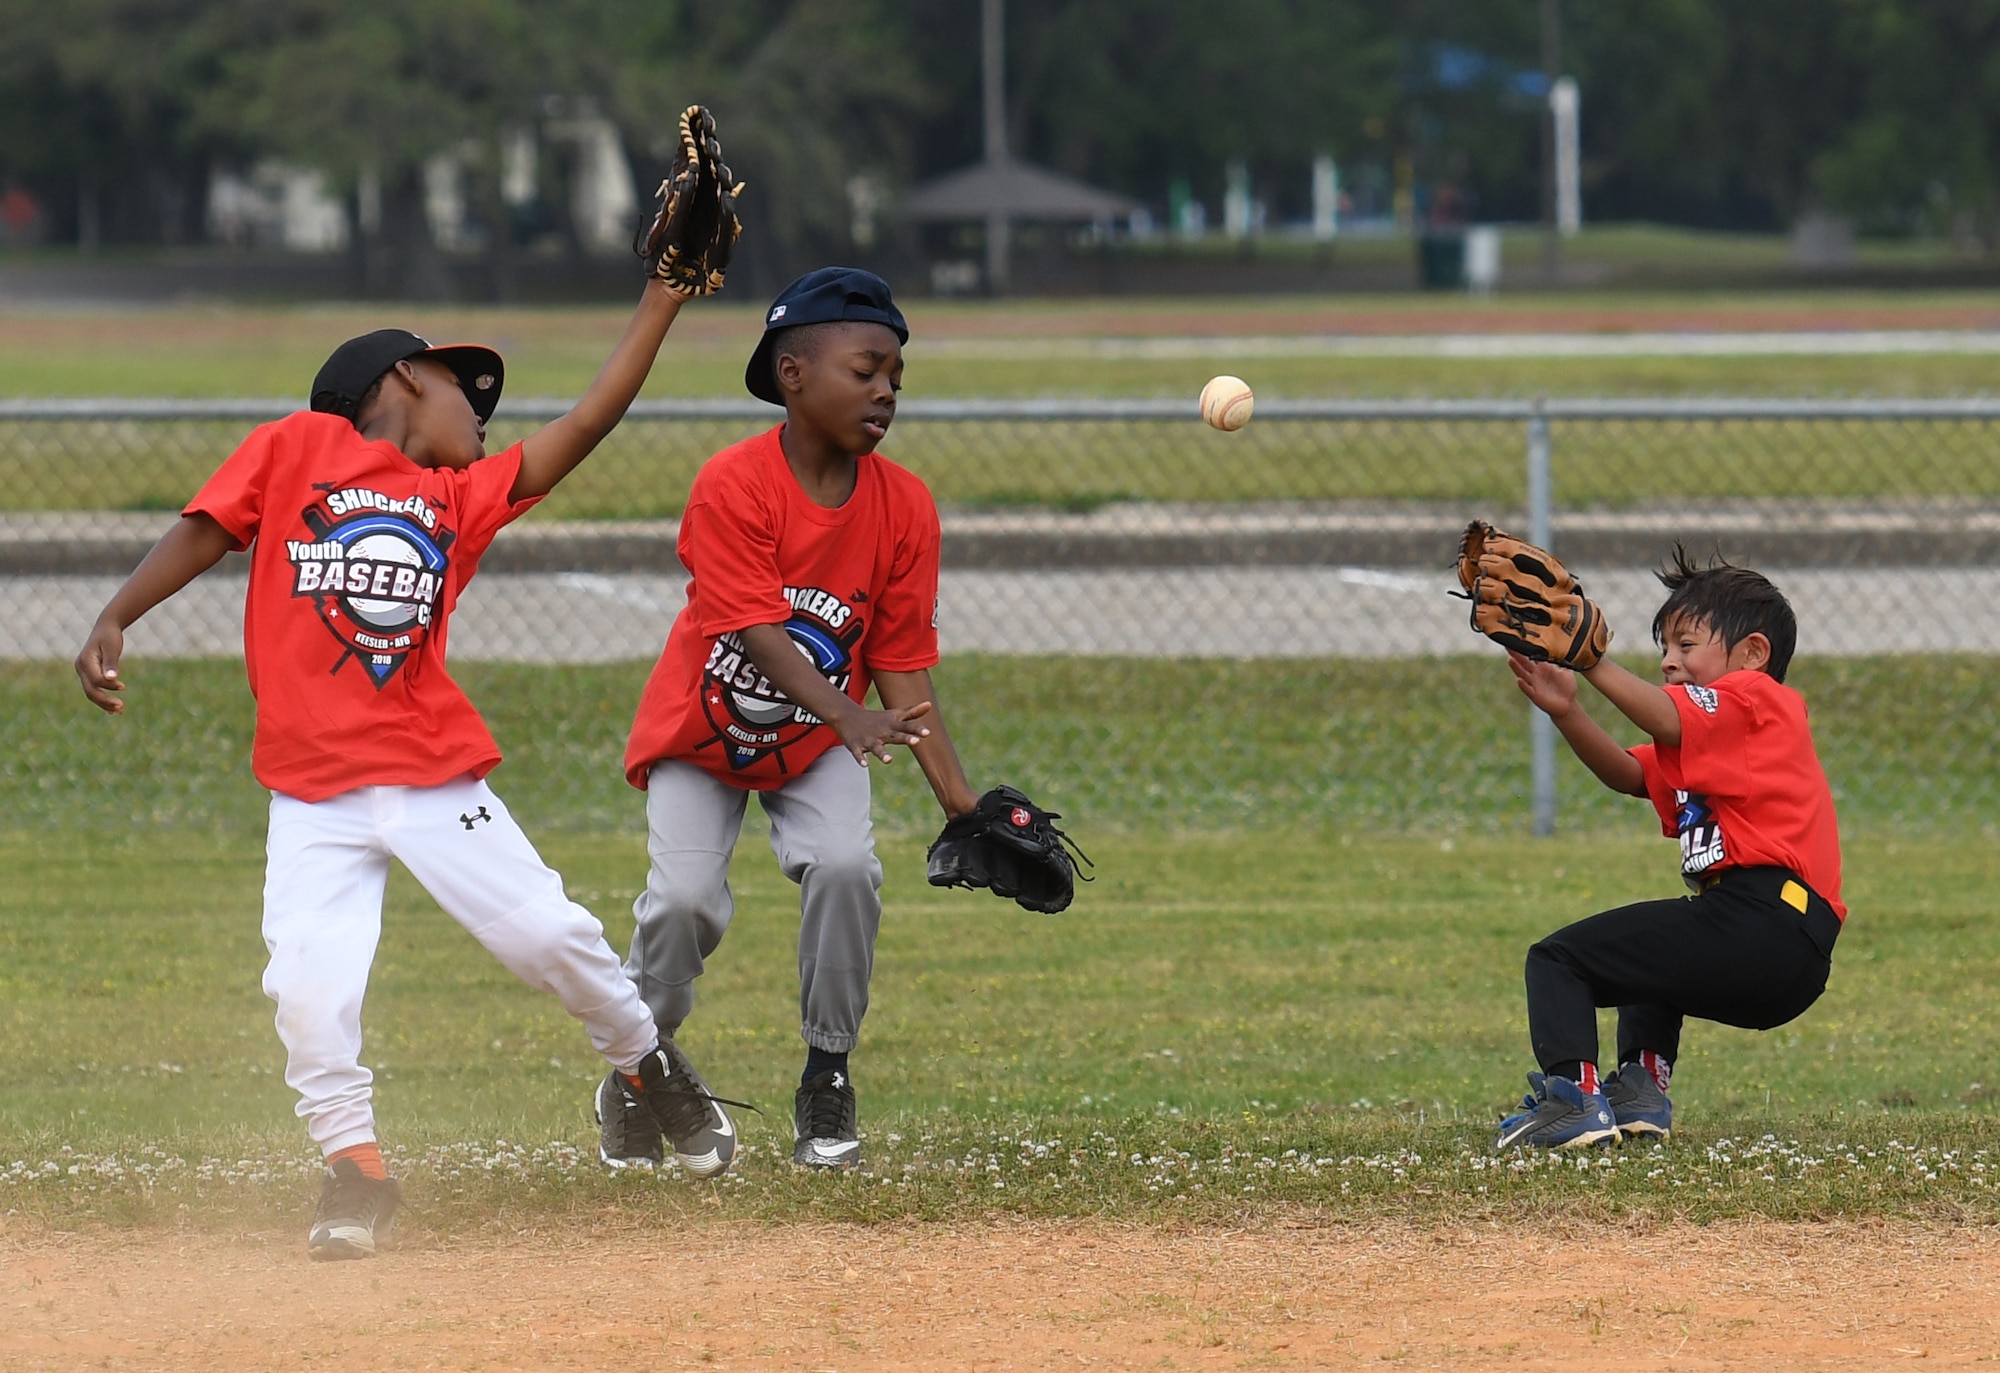 Keesler children try to catch the ball during the Biloxi Shuckers Youth Baseball Clinic on the youth center baseball field at Keesler Air Force Base, Mississippi, May 5, 2018. More than 20 children attended the clinic that provided hitting, pitching, base running and fielding instruction from members of the Biloxi Shuckers minor league baseball team. (U.S. Air Force photo by Kemberly Groue)